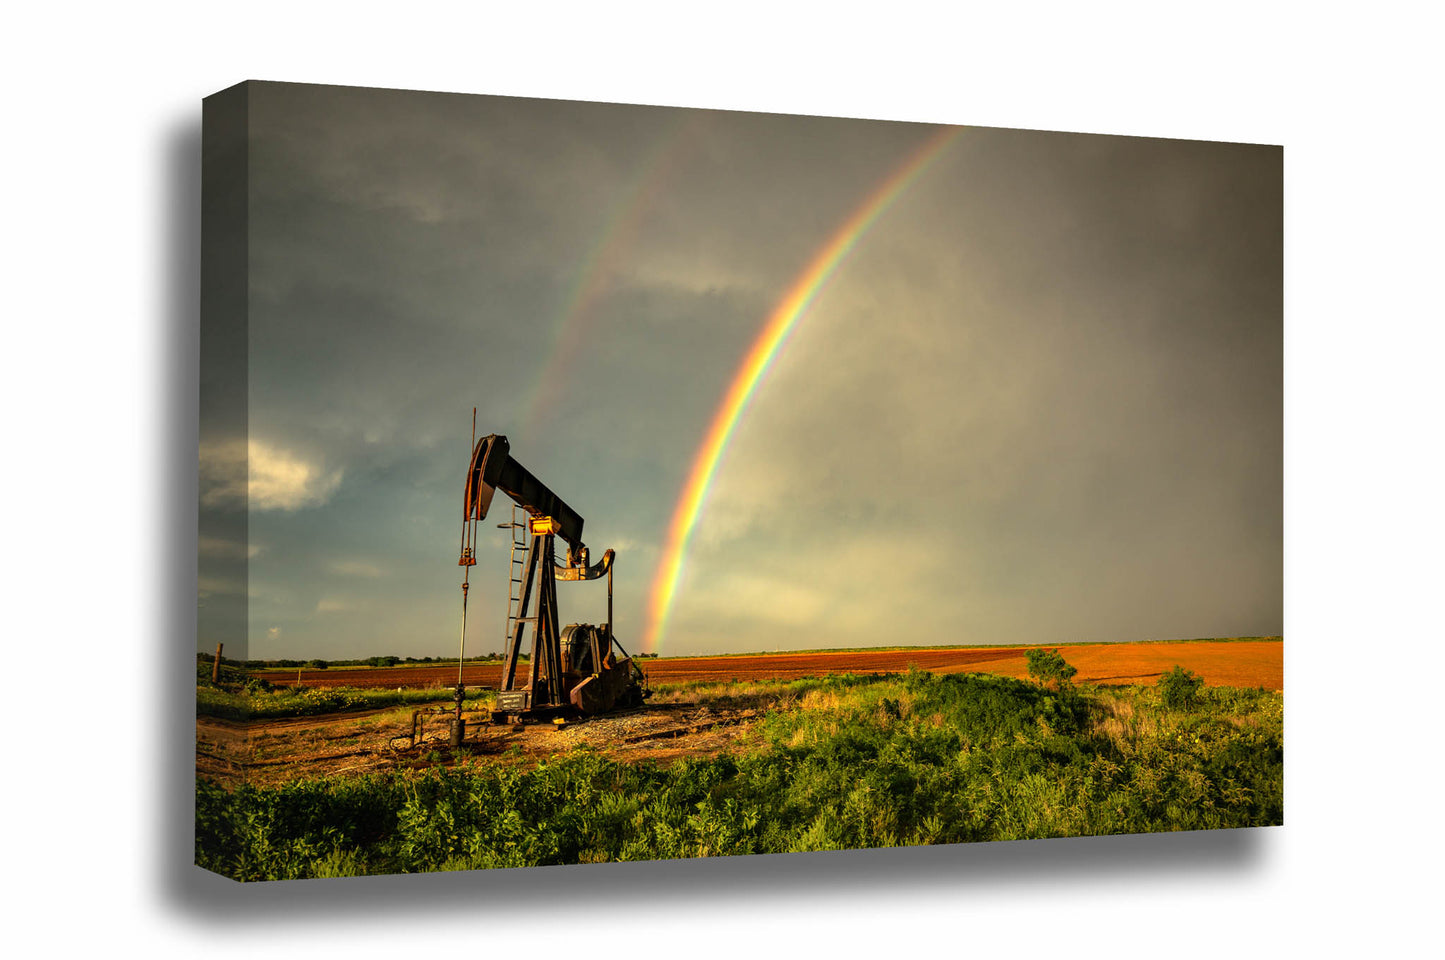 Oilfield canvas wall art of a brilliant rainbow ending at a pump jack after a stormy spring day on the plains of Texas by Sean Ramsey of Southern Plains Photography.